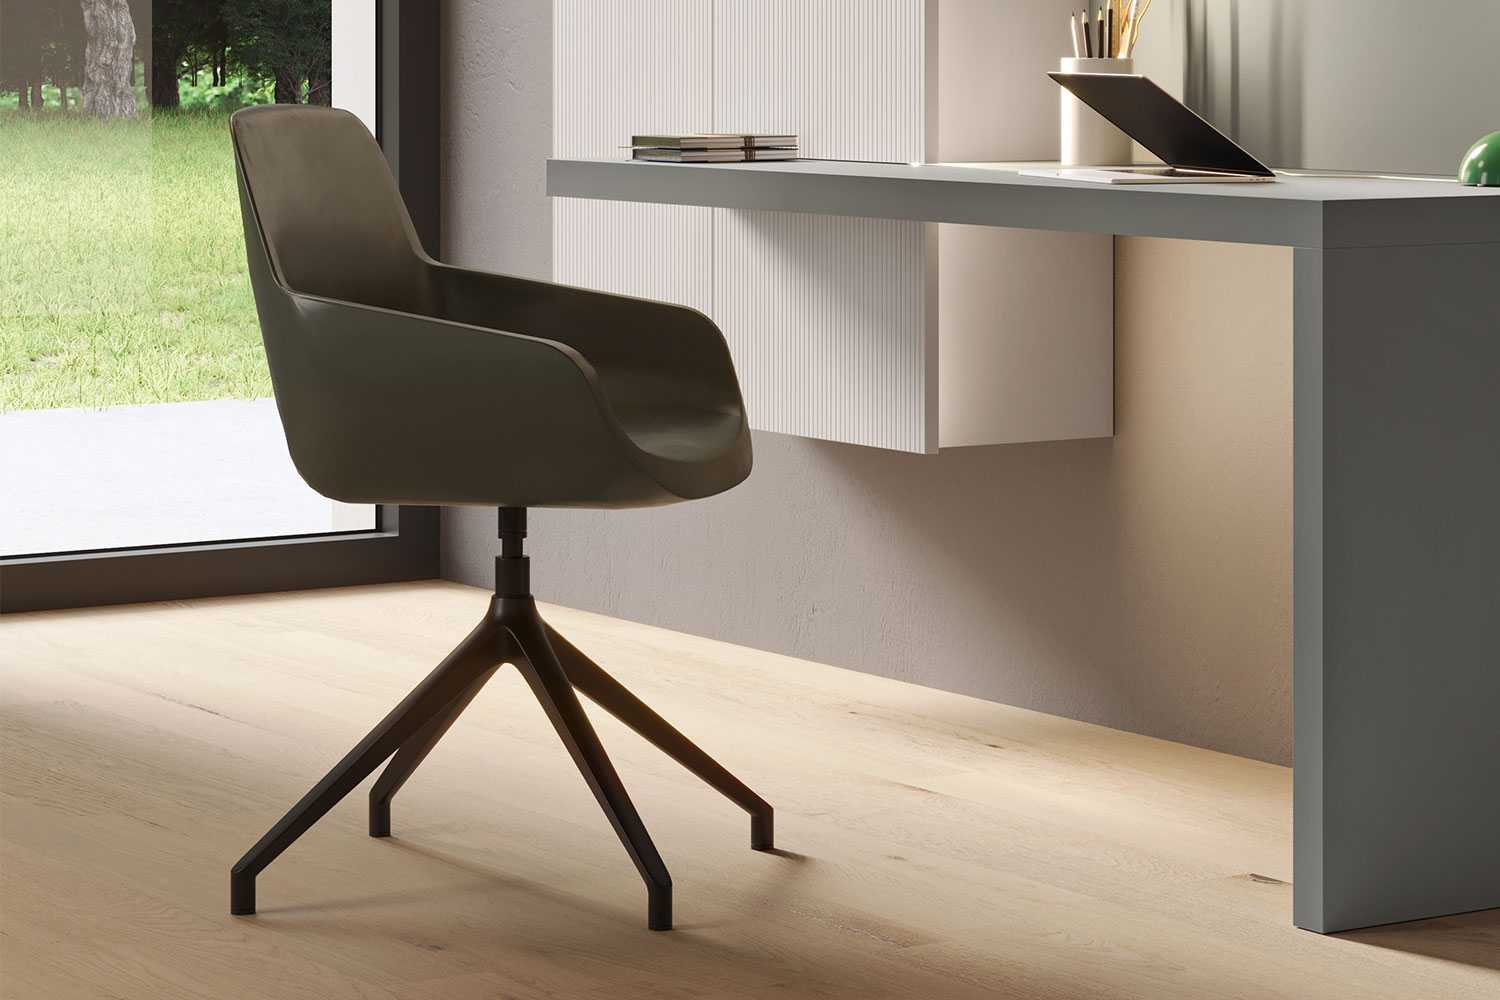 Upholstered office chair without wheels Clea